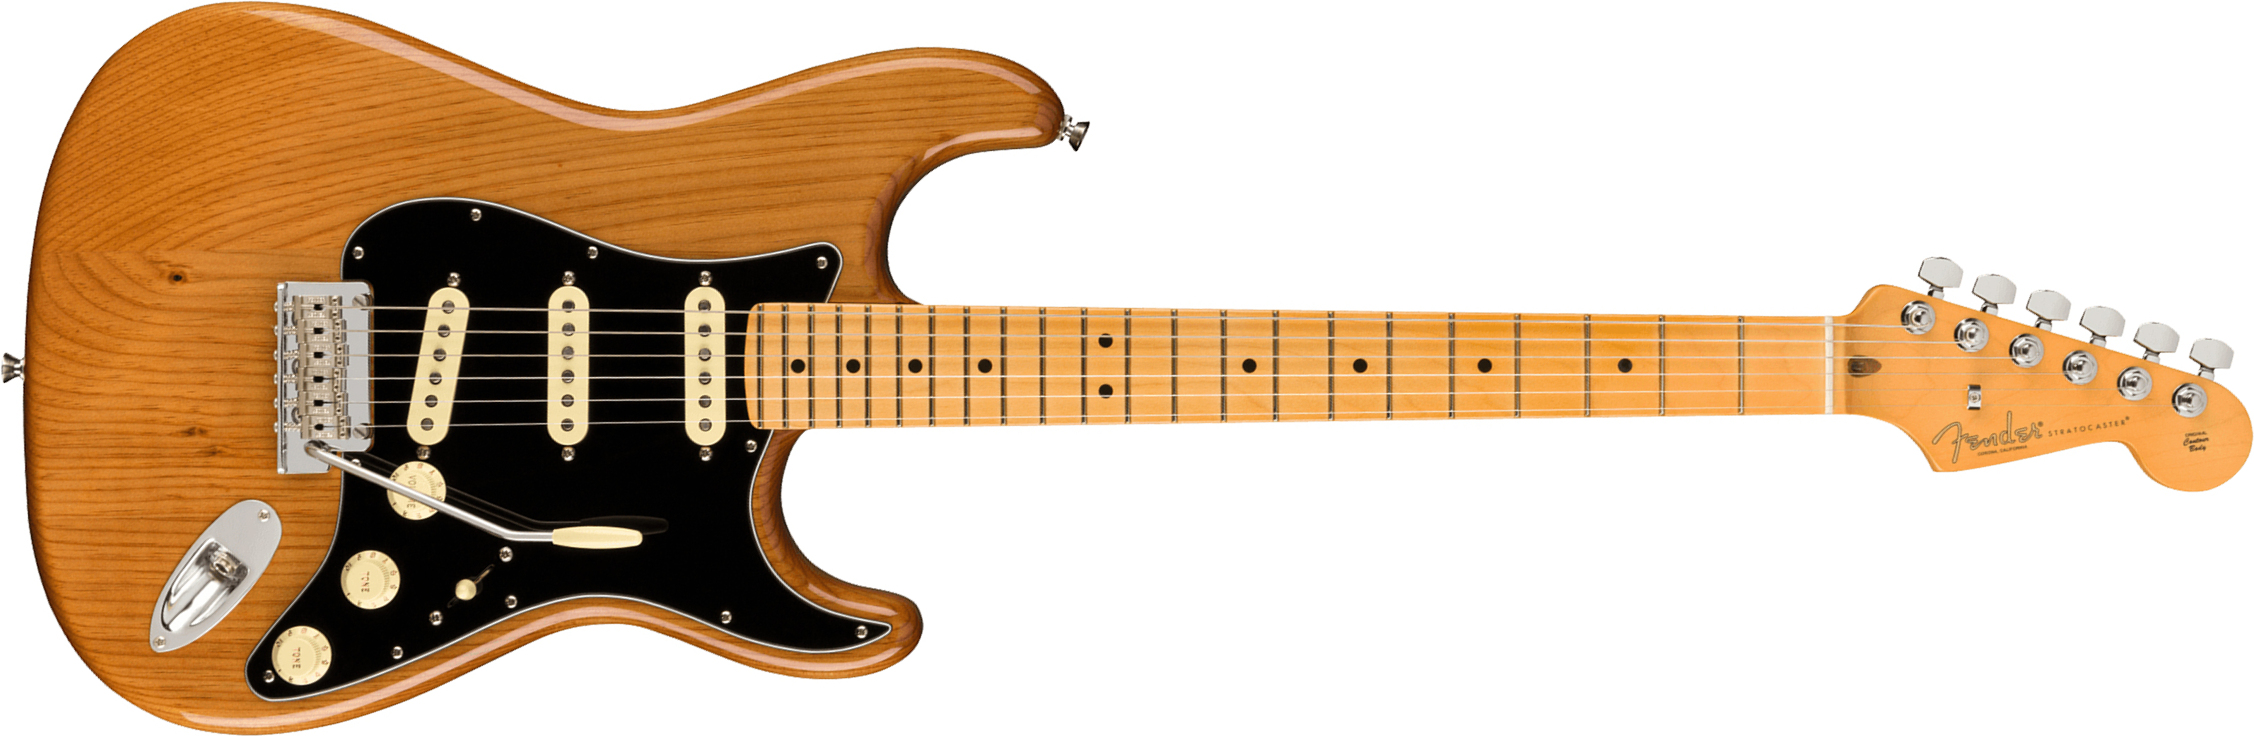 Fender Strat American Professional Ii Usa Mn - Roasted Pine - Guitare Électrique Forme Str - Main picture